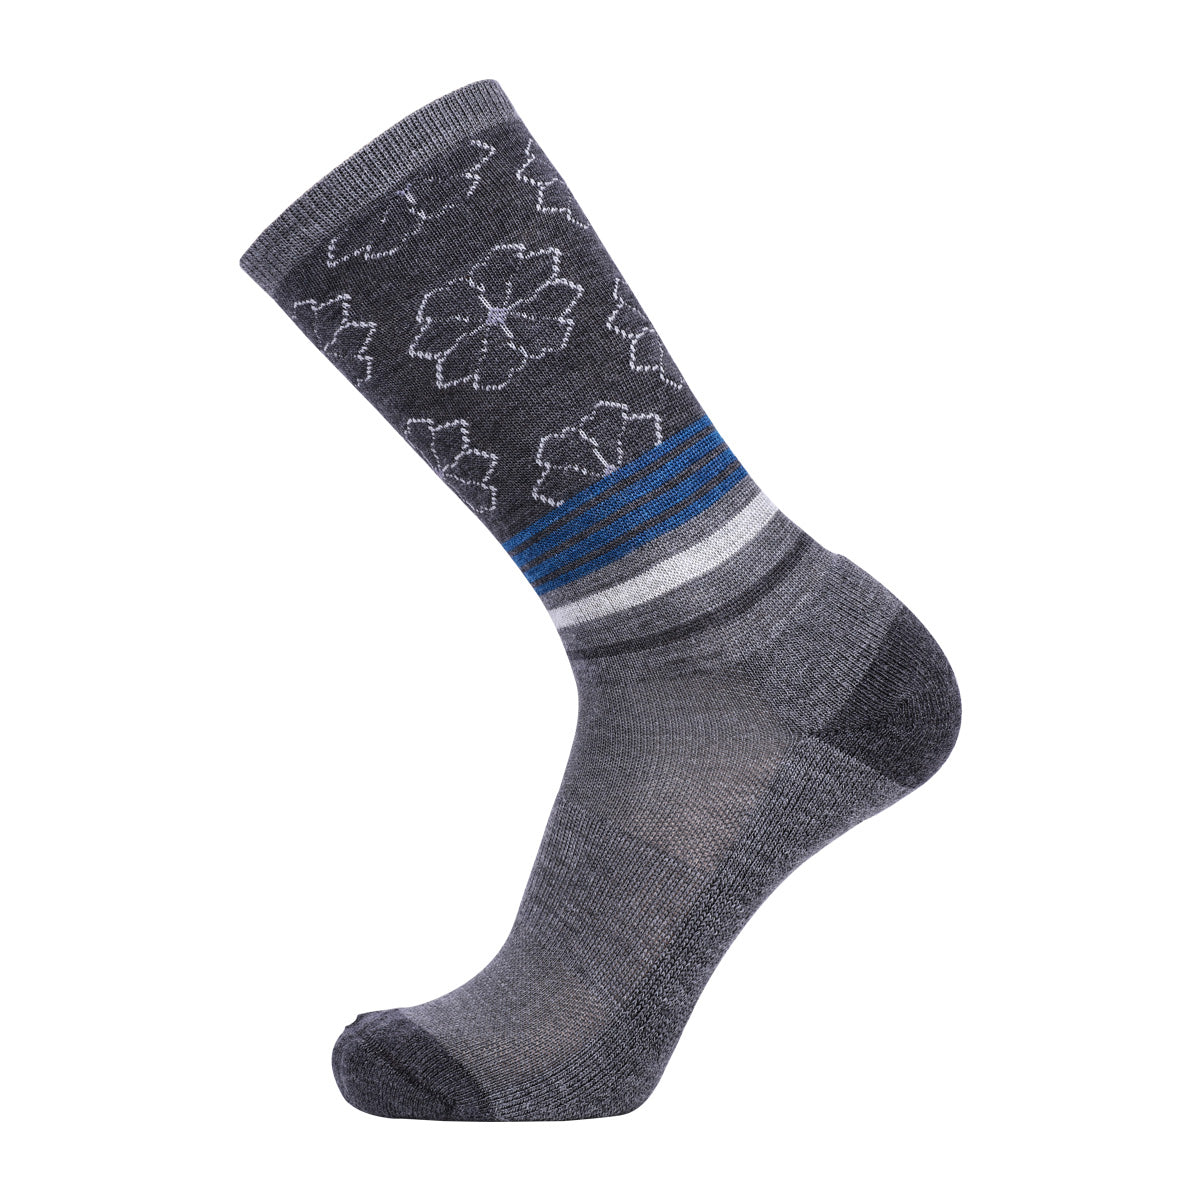 Looking for a unique sock? Check out merinohouse&